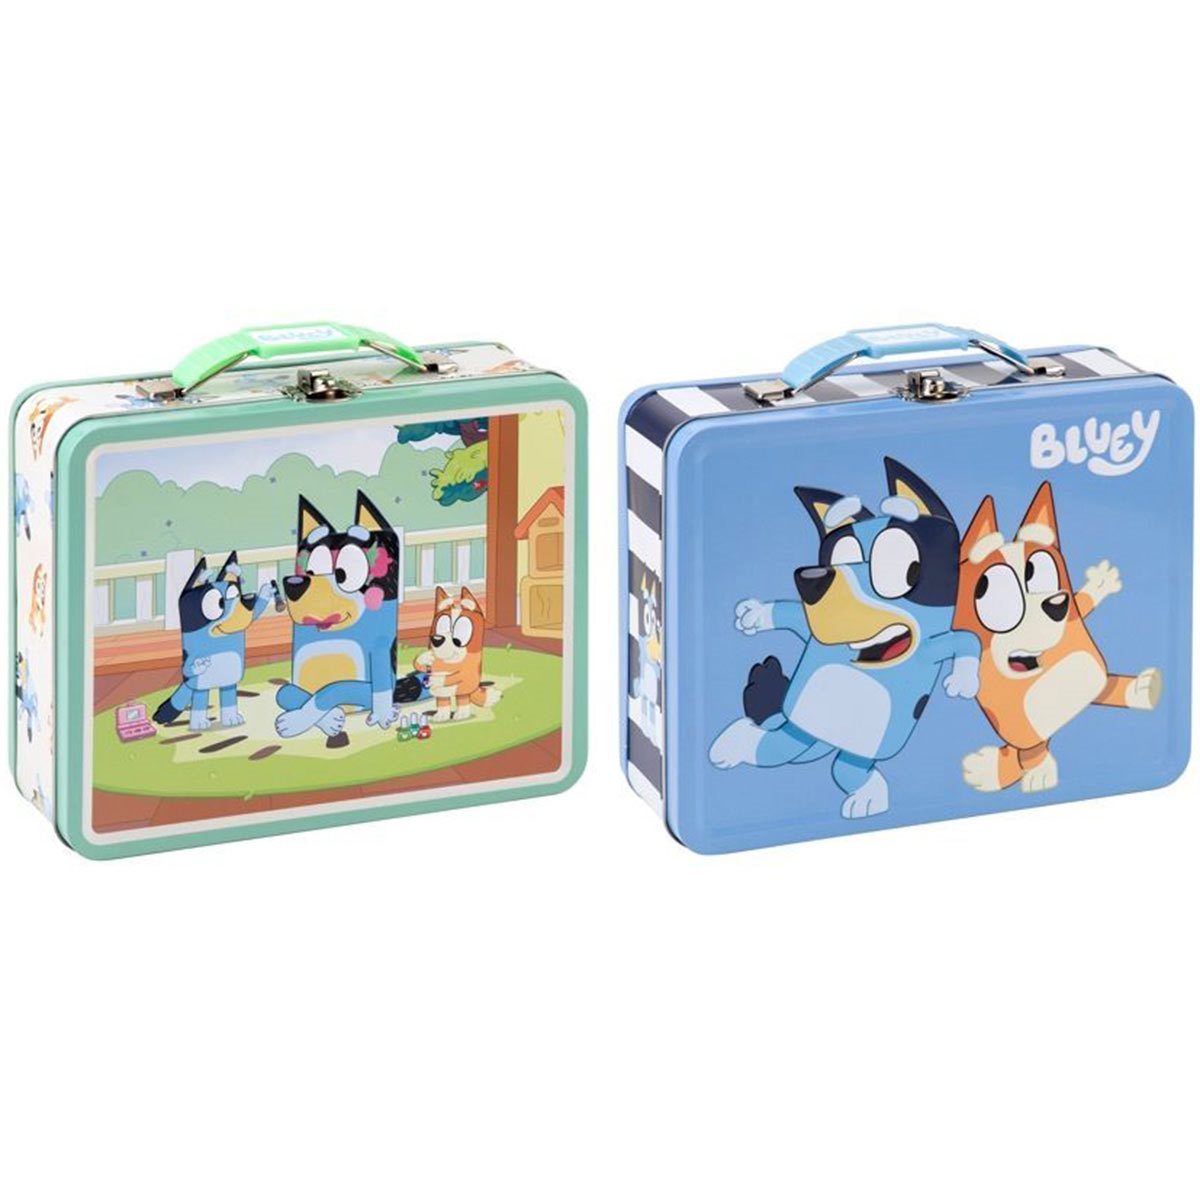 Bluey Carry All Tin Tote Set of 2 - Entertainment Earth